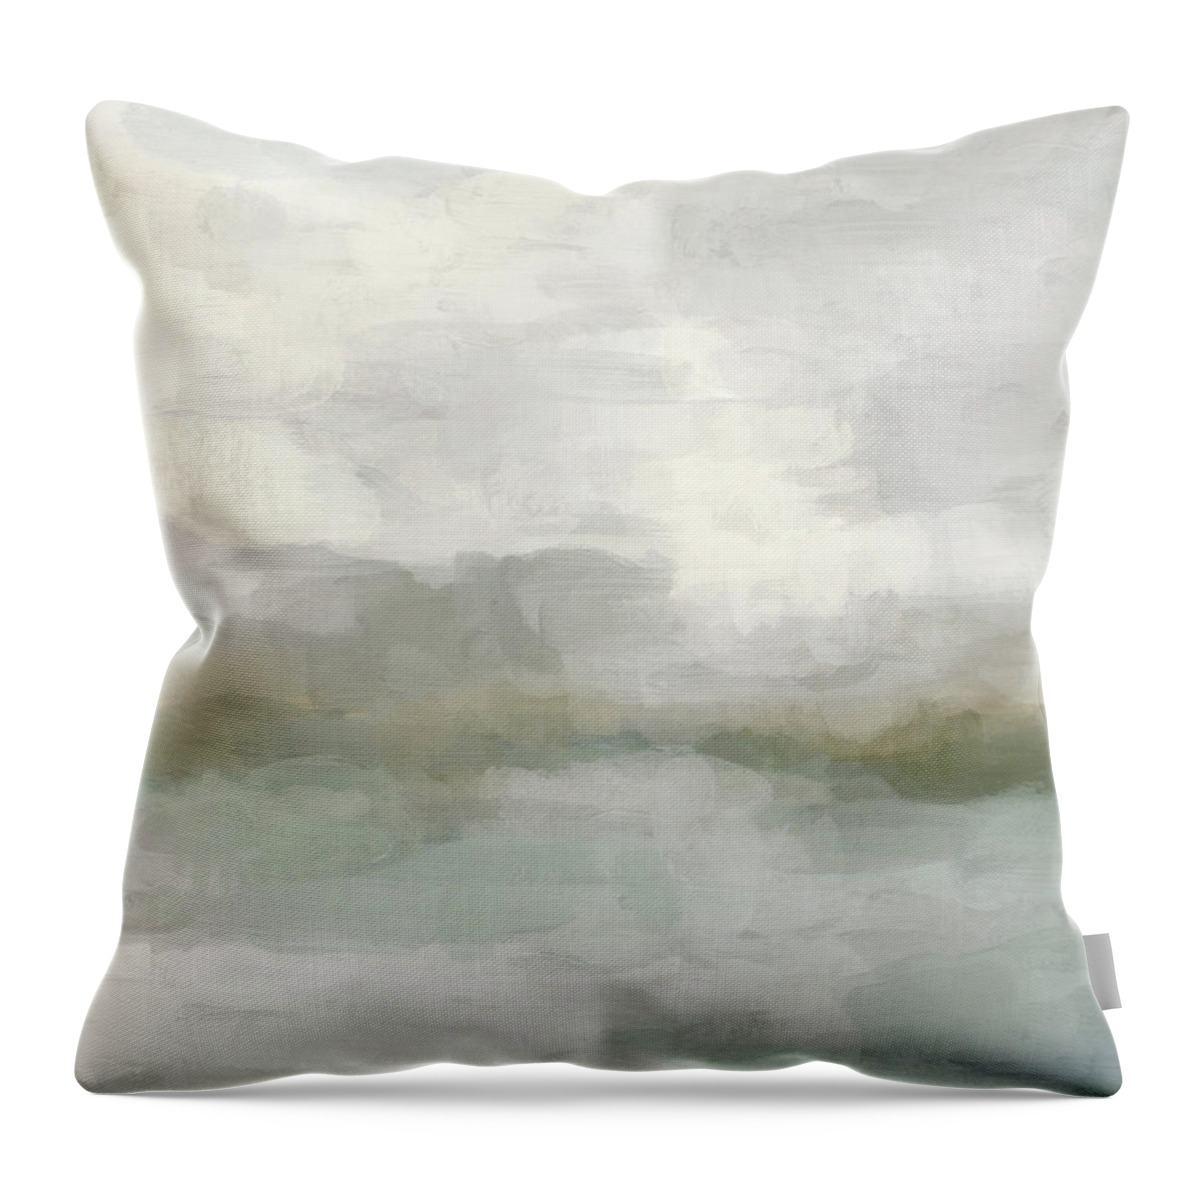 Light Teal Throw Pillow featuring the painting Break in the Weather II by Rachel Elise